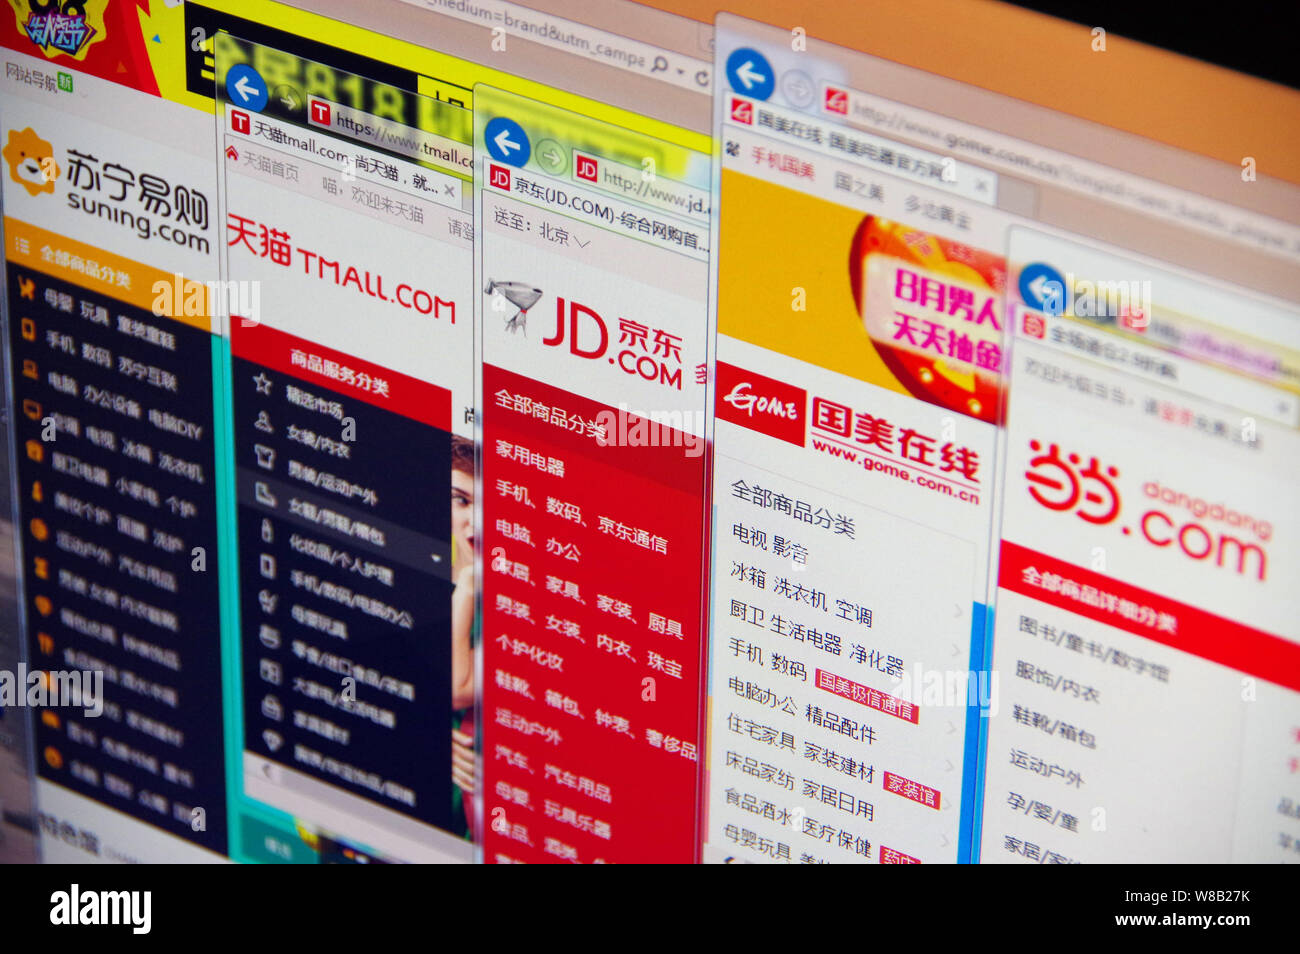 Screen shot shows the online shopping websites of (from left) Suning.com, tmall.com (Taobao Mall) of Alibaba Group, JD.com, gome.com.cn and dangdang.c Stock Photo